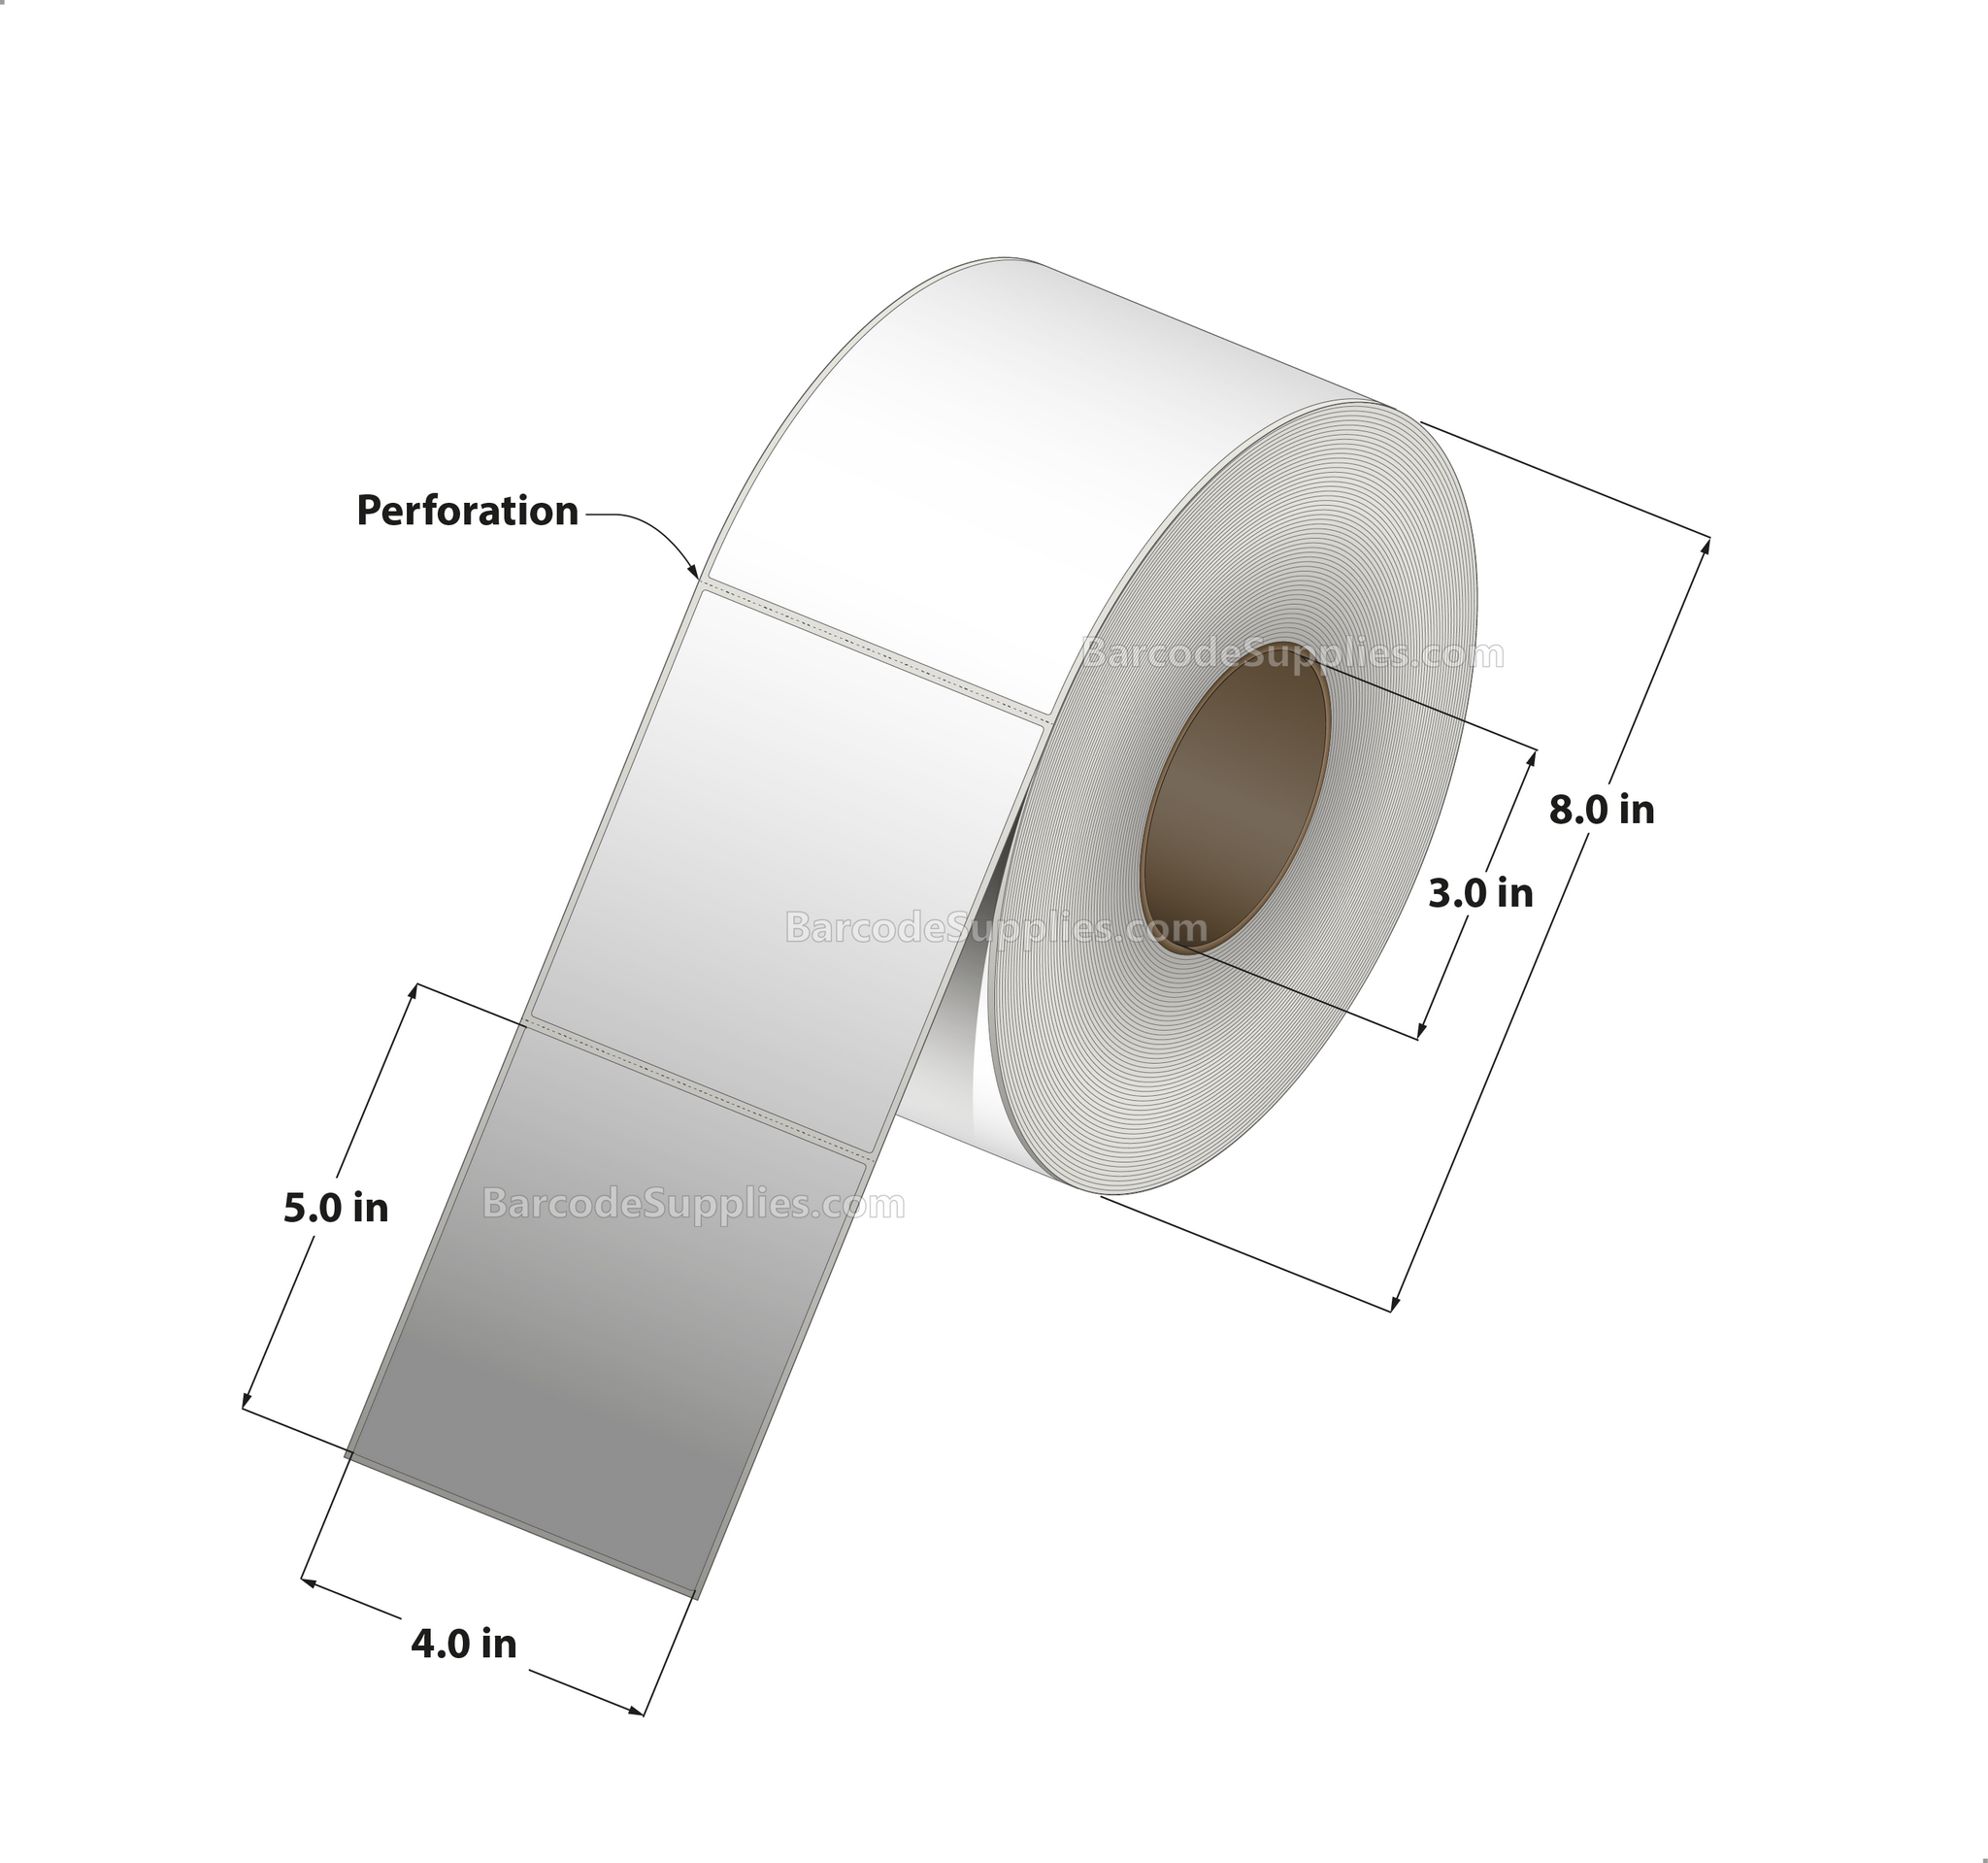 4 x 5 Thermal Transfer White Labels With Permanent Acrylic Adhesive - Perforated - 1250 Labels Per Roll - Carton Of 4 Rolls - 5000 Labels Total - MPN: TH45-1P